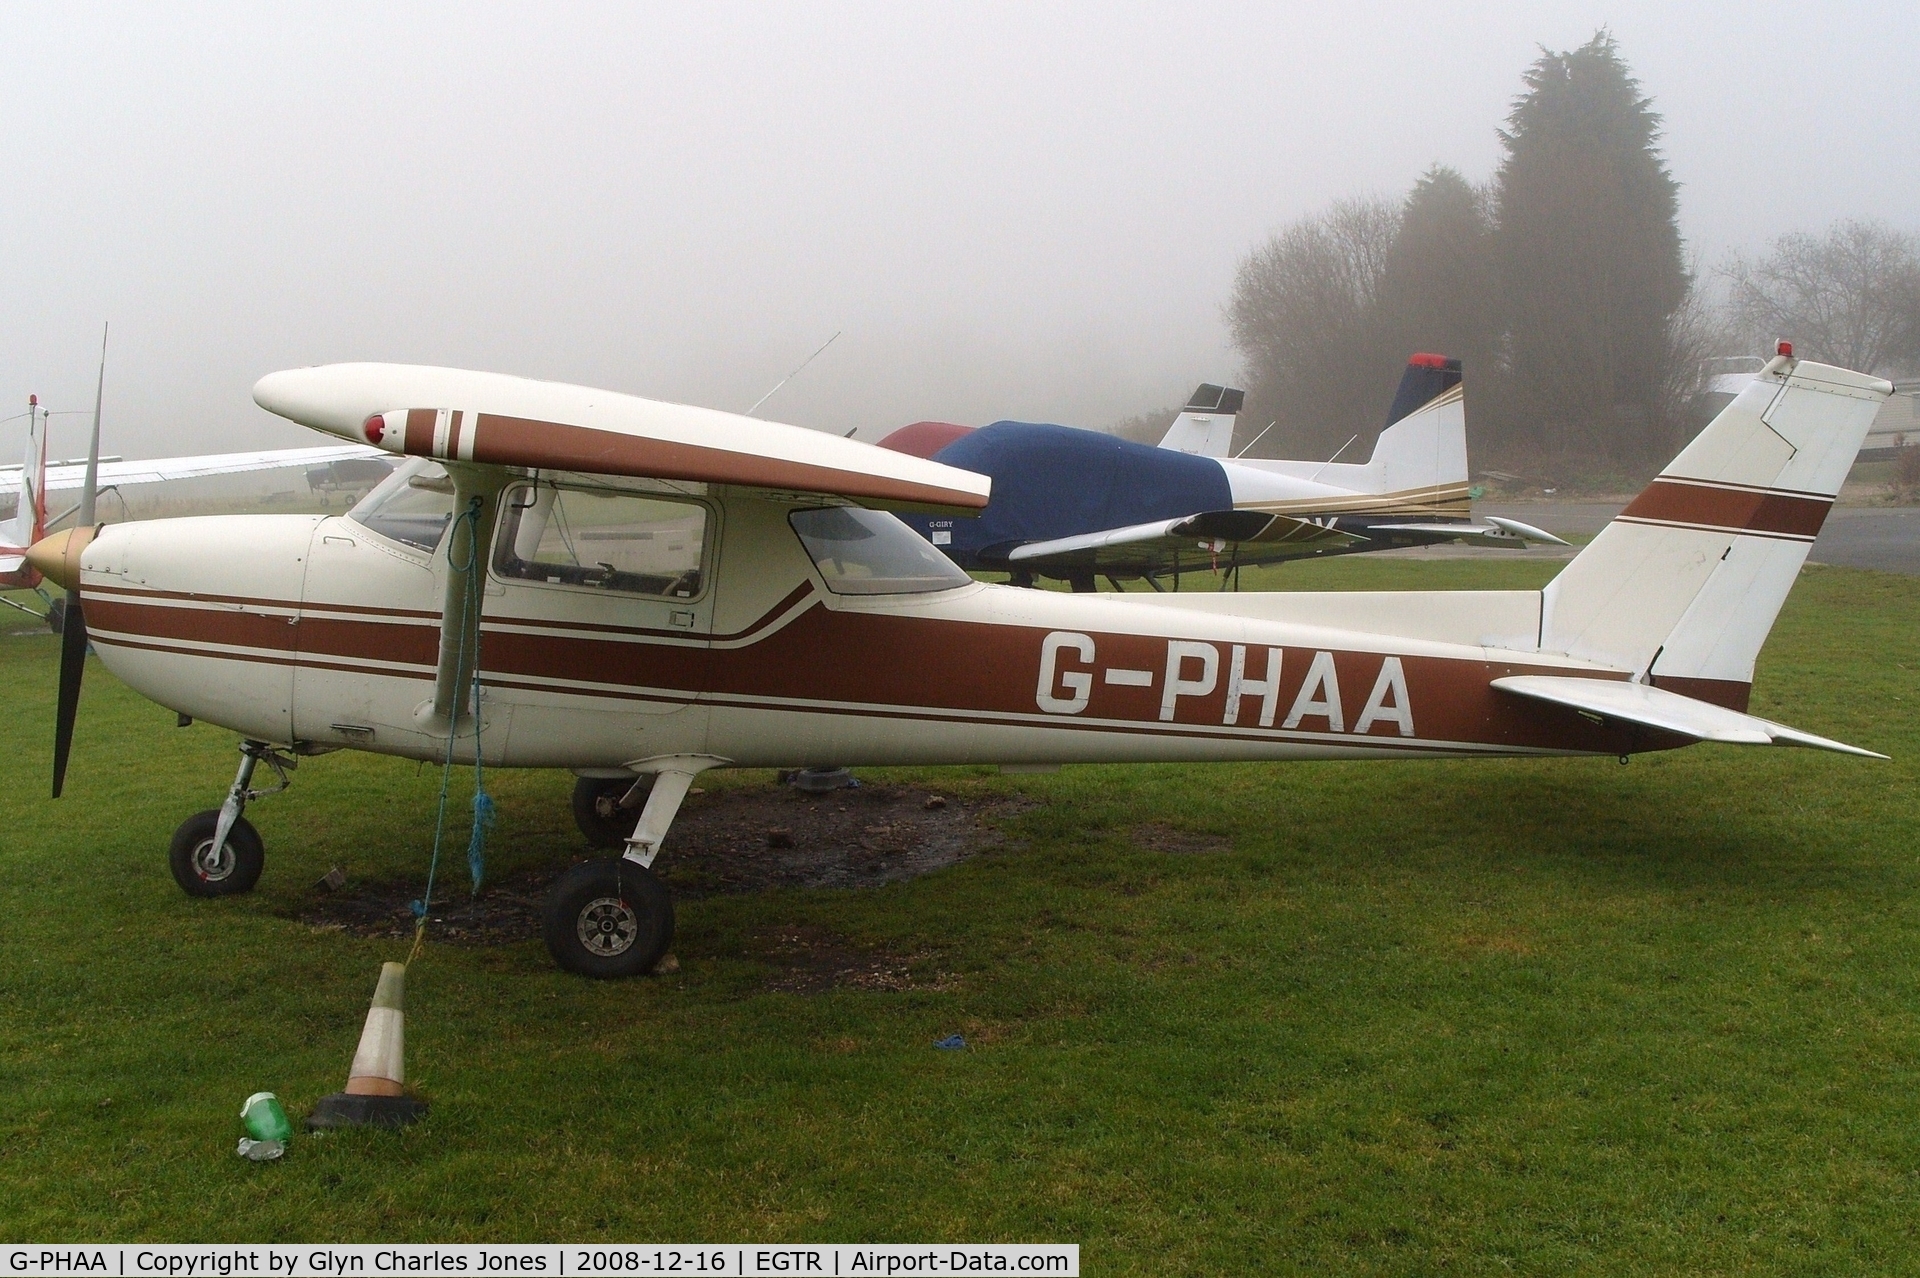 G-PHAA, 1974 Reims F150M C/N 1159, Taken on a quiet cold and foggy day. With thanks to Elstree control tower who granted me authority to take photographs on the aerodrome. Previously G-BCPE. Owned by PHA Aviation.